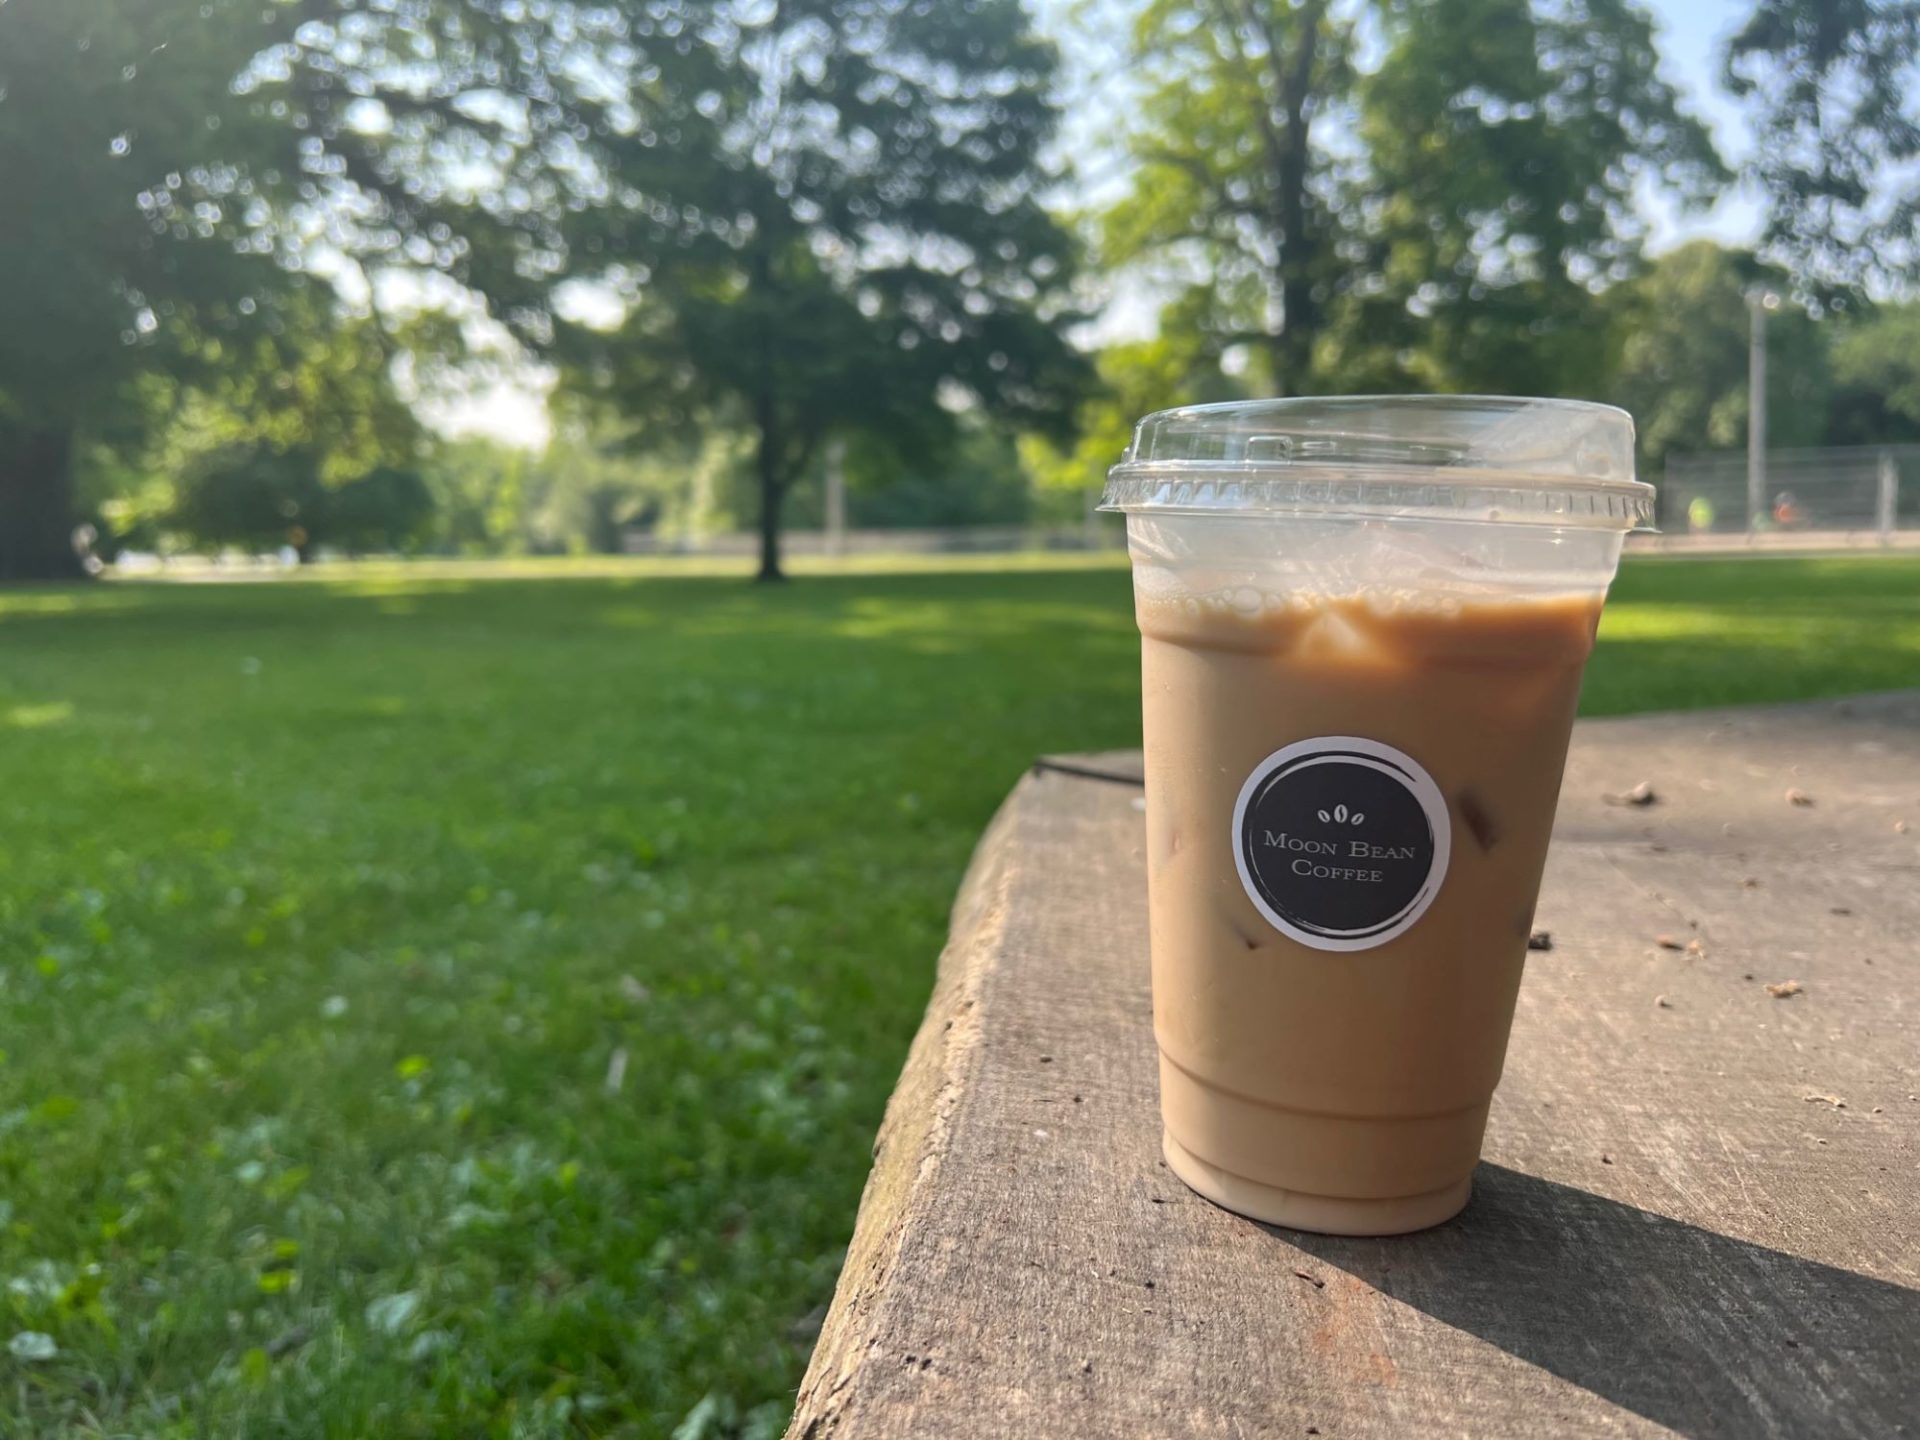 A plastic cup with iced coffee and cream sits on a wooden bench in a large grassy area.